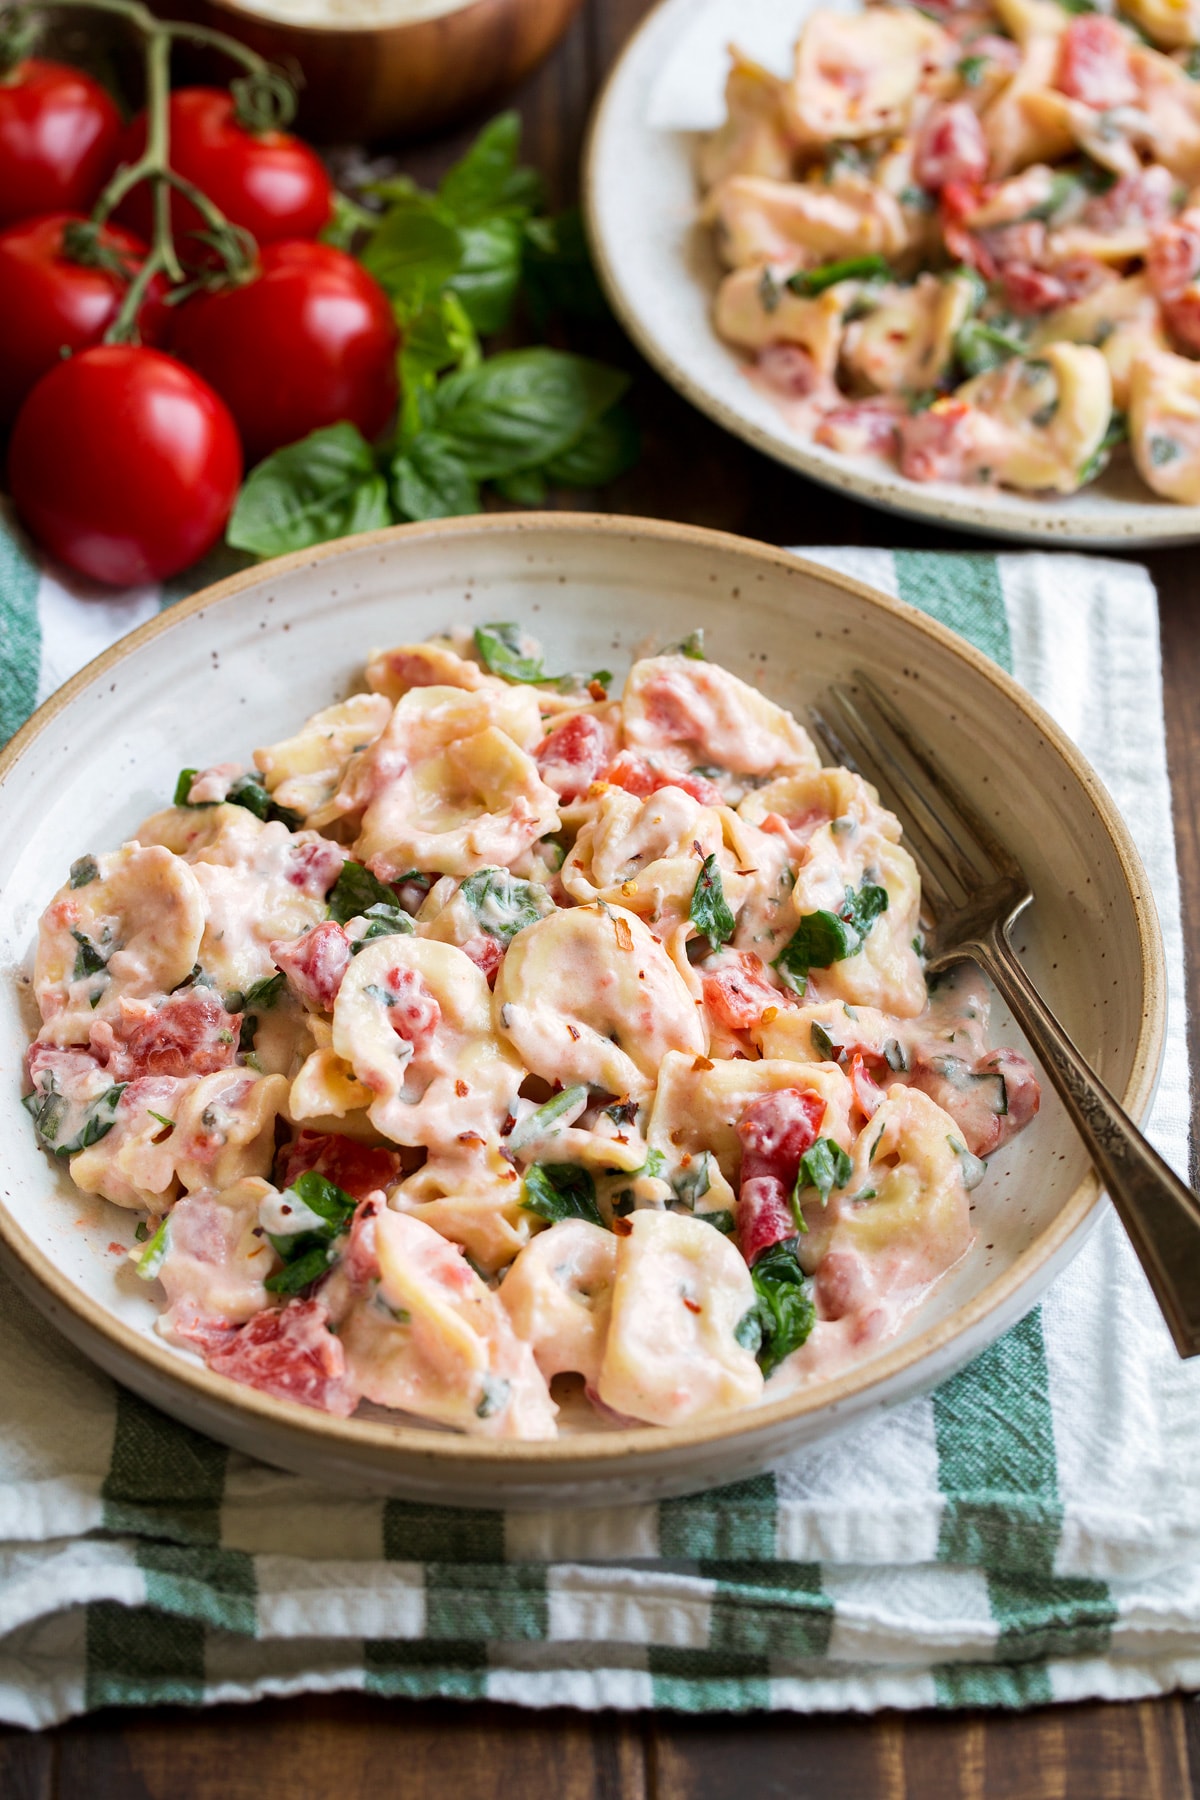 Serving of spinach and tomato tortellini in a pasta bowl.